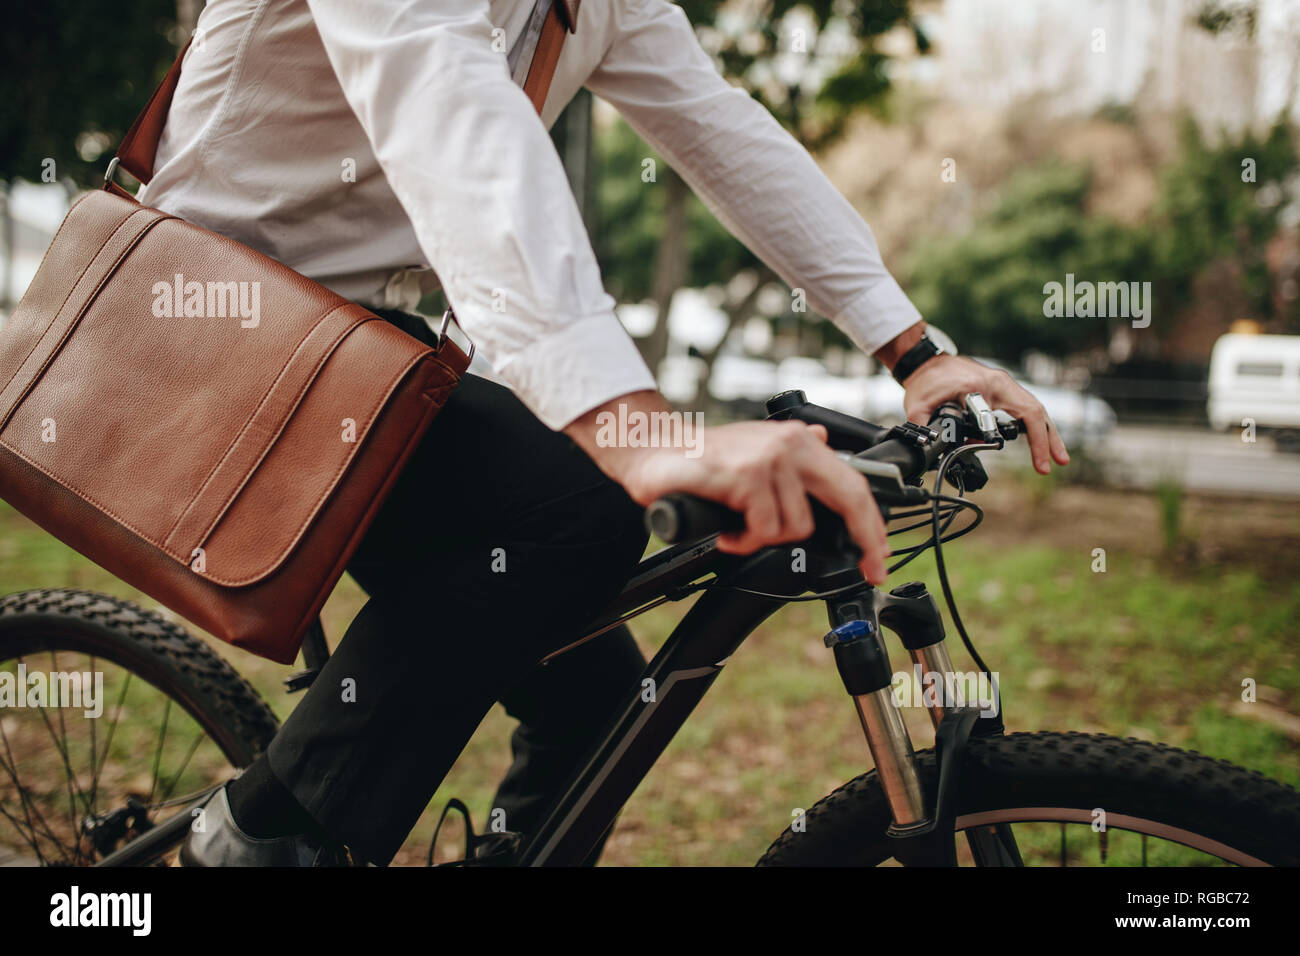 Man wearing an office bag riding a bike. Businessman going to office on a bicycle. Stock Photo